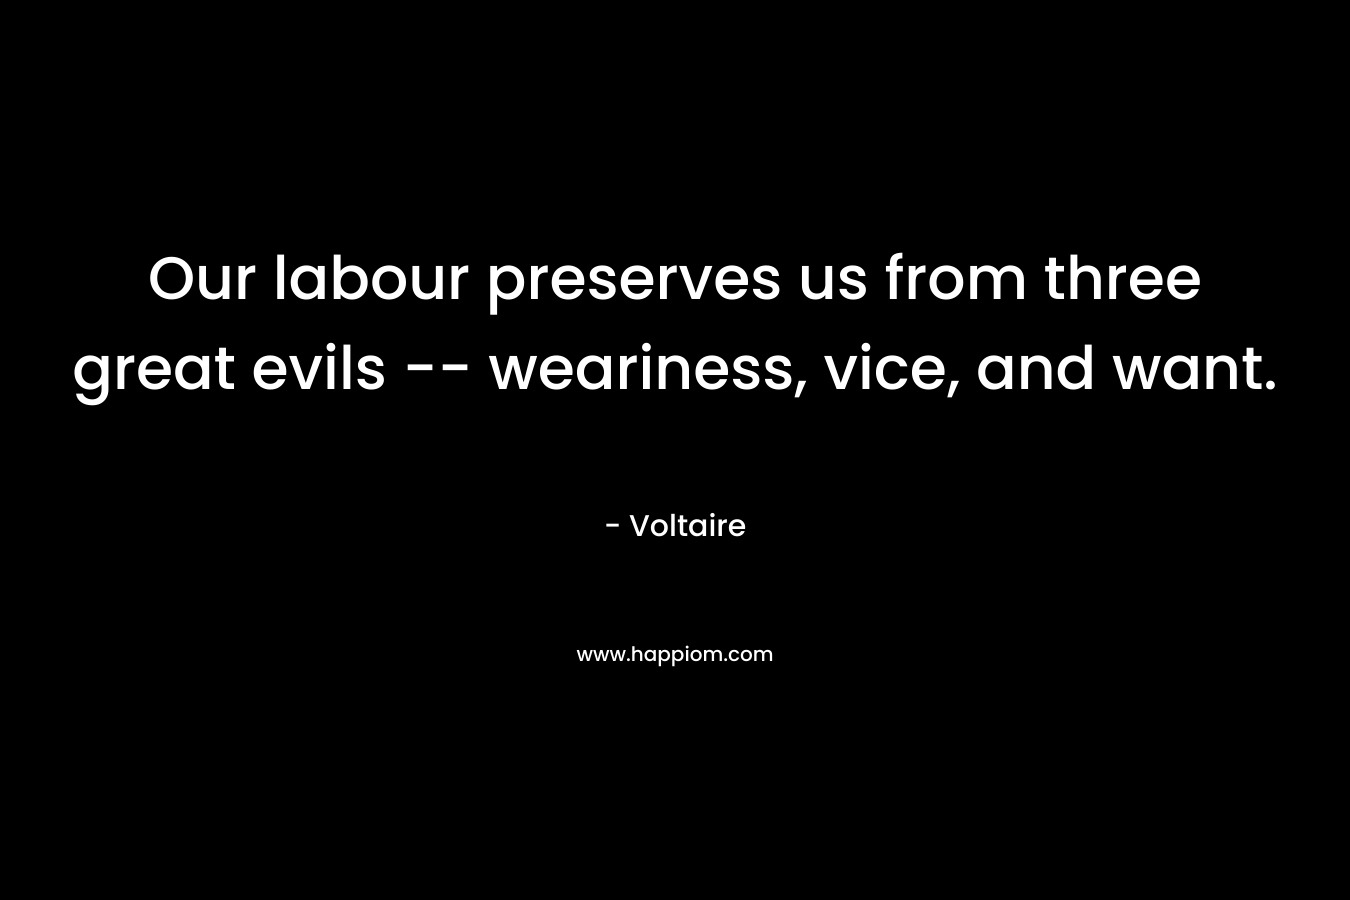 Our labour preserves us from three great evils — weariness, vice, and want. – Voltaire